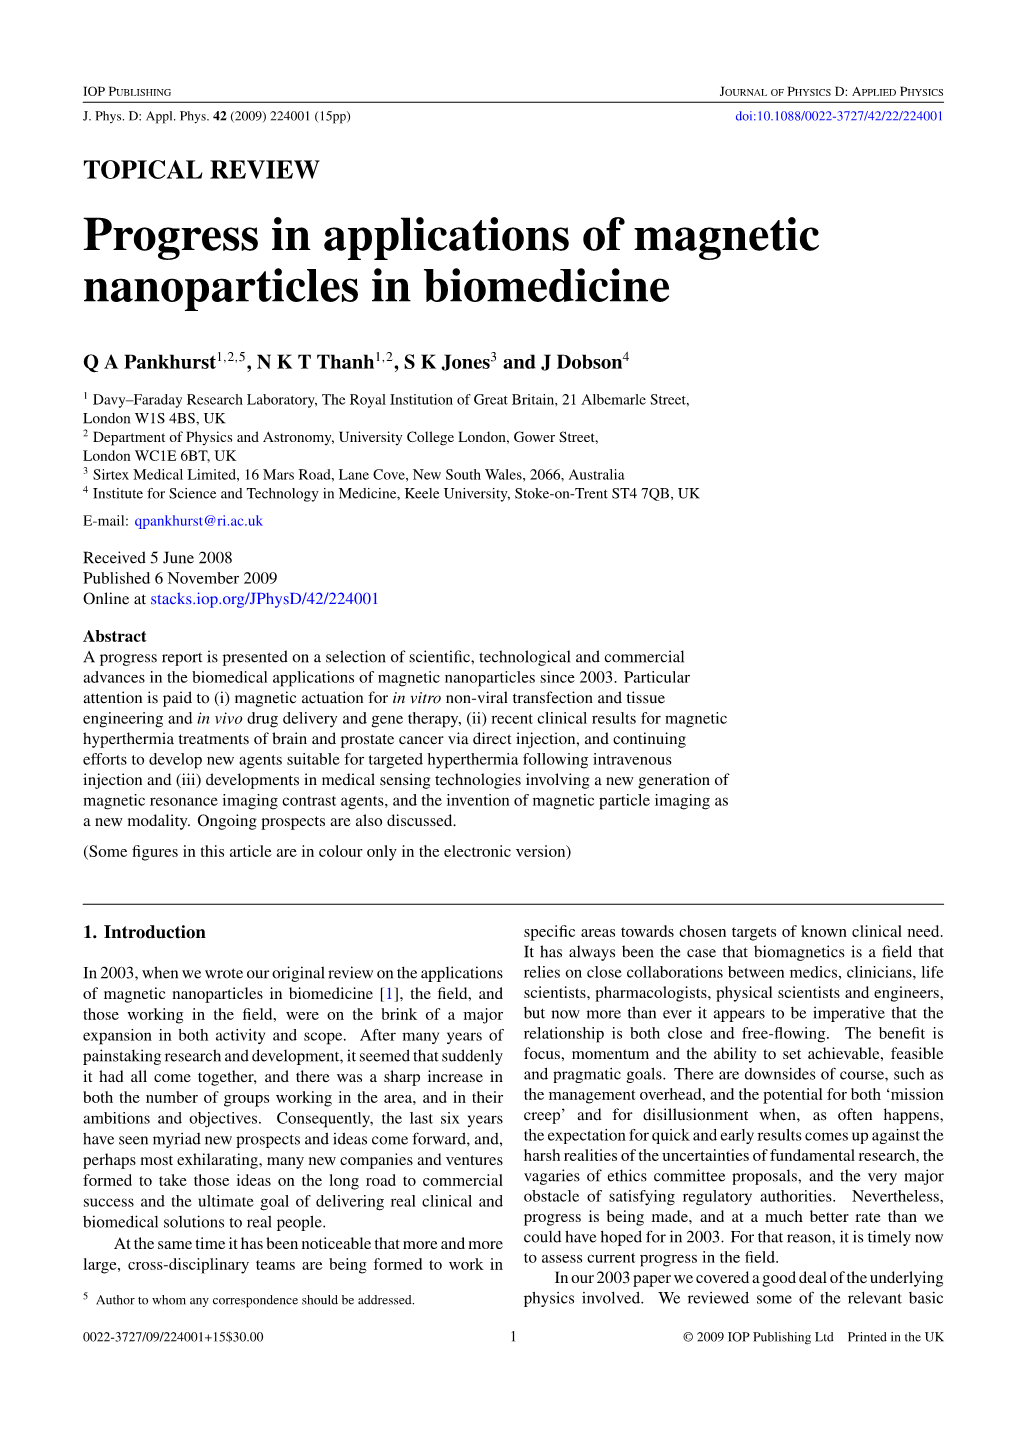 TOPICAL REVIEW Progress in Applications of Magnetic Nanoparticles in Biomedicine